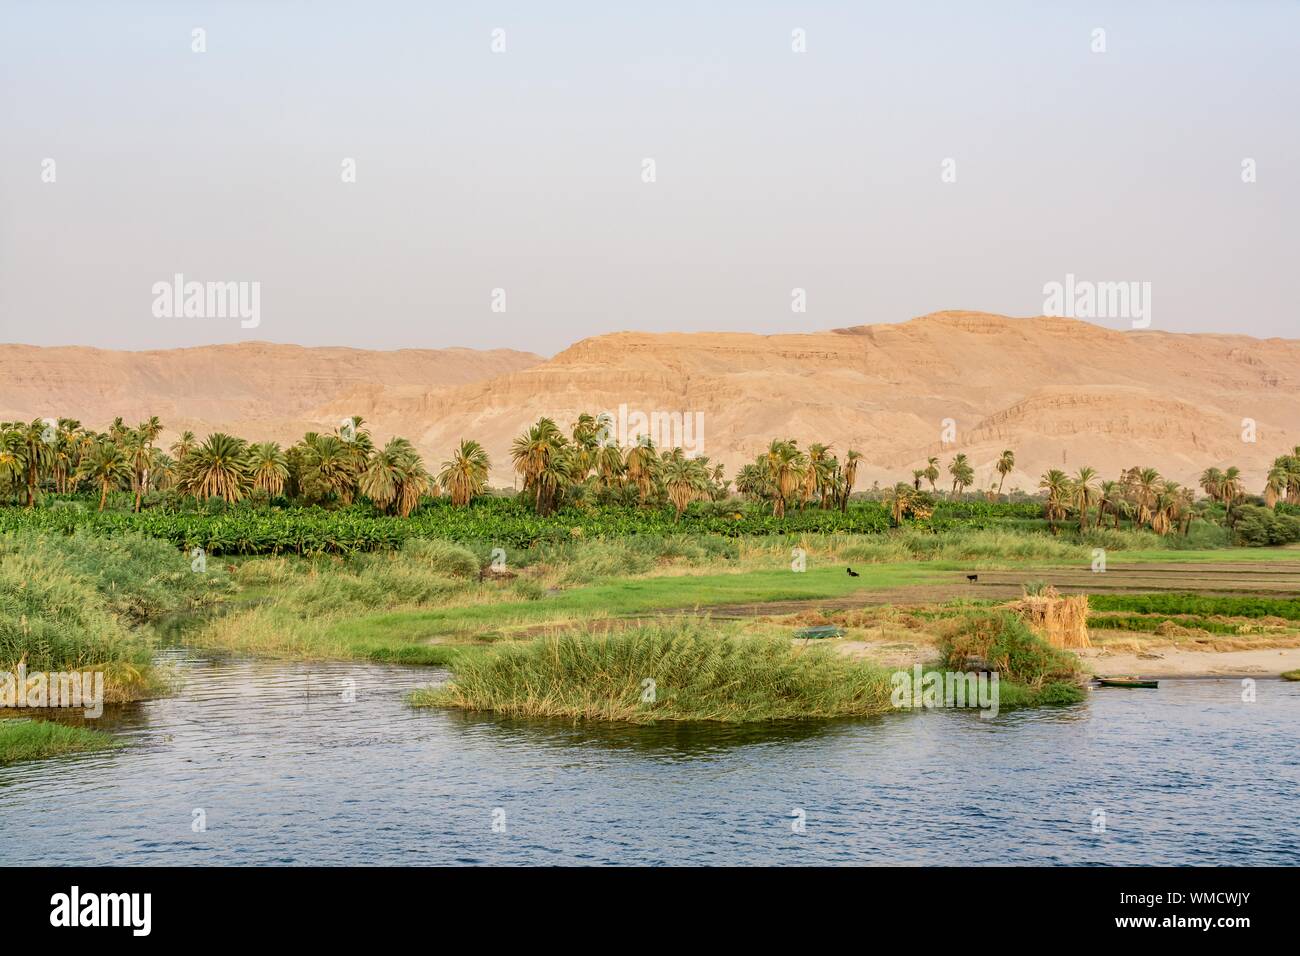 Bank of Nile river seen during touristic cruise, Egypt Stock Photo